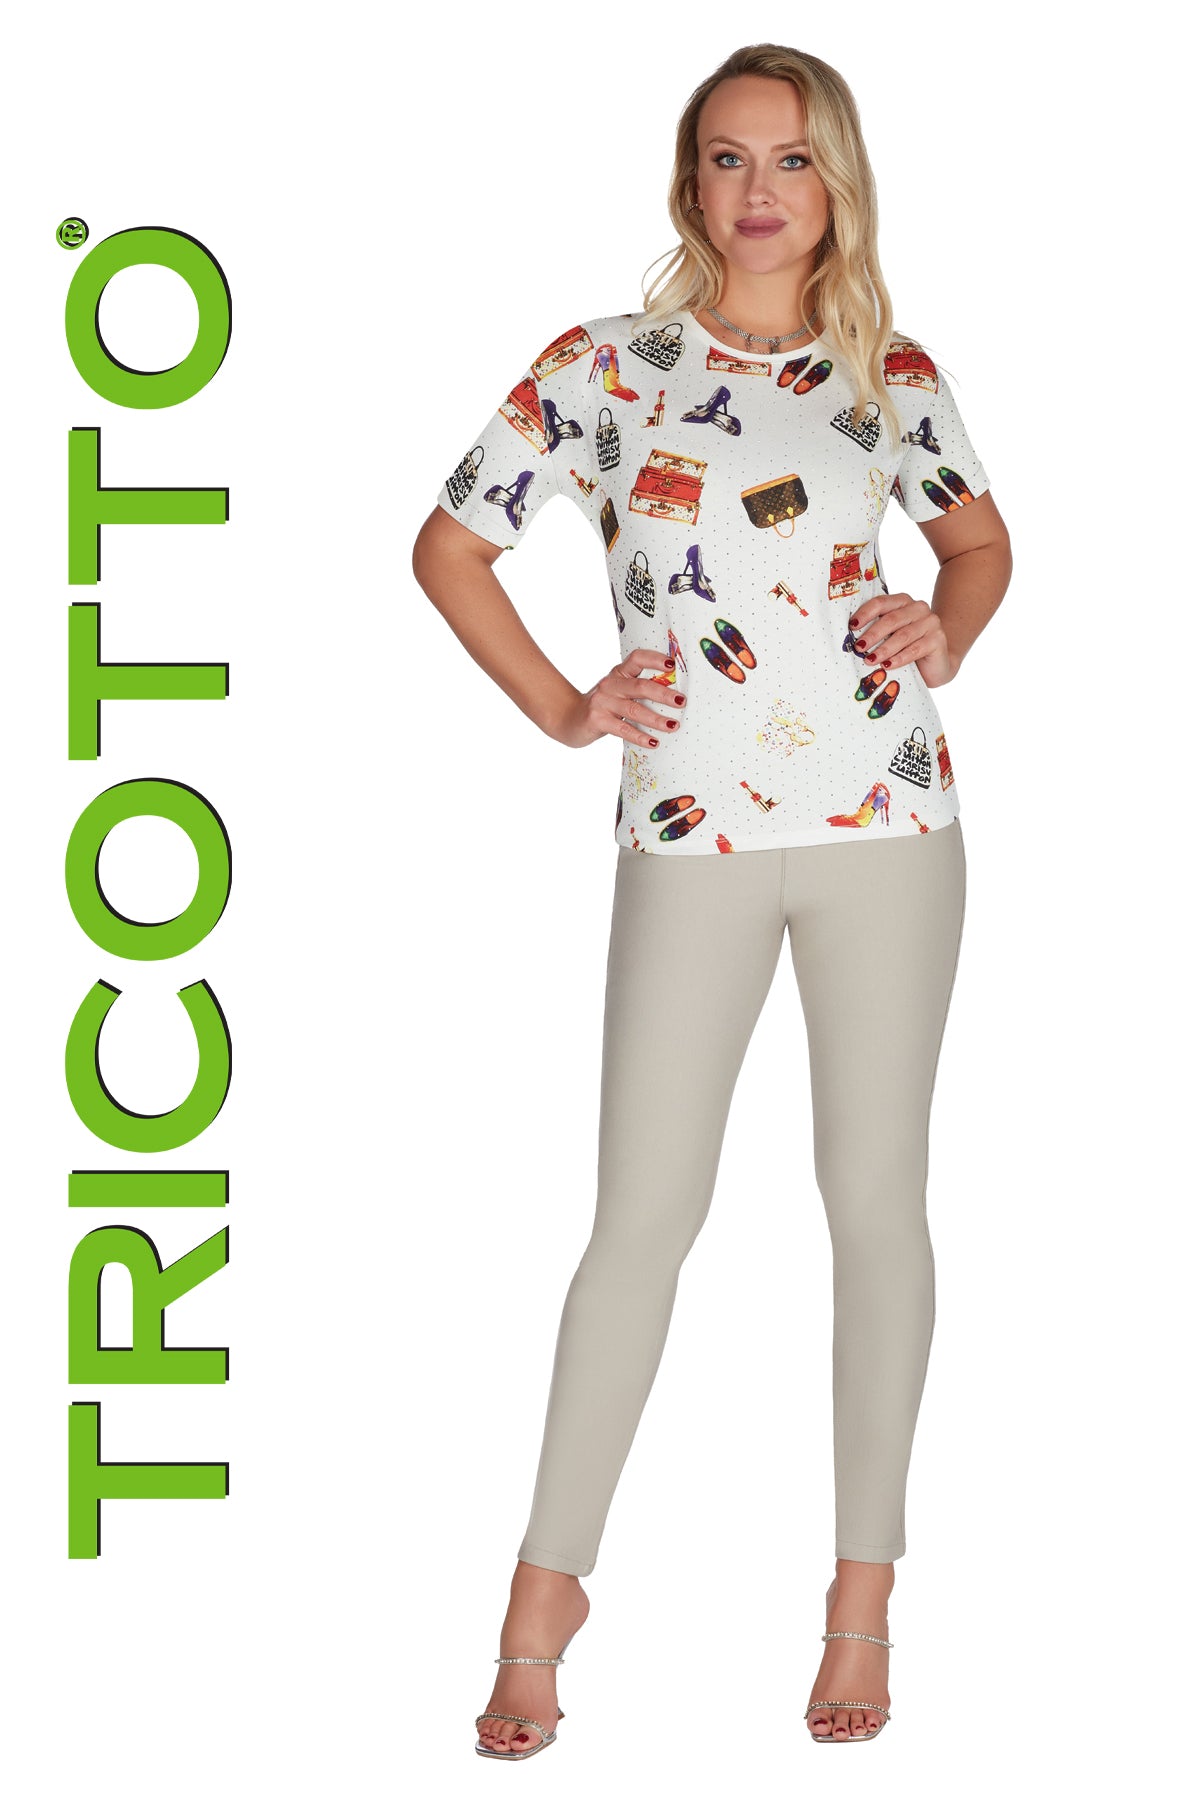 Tricotto T-shirts-Buy Tricotto T-shirts Online-Tricotto Clothing Montreal-Women's T-shirts Online Canada-Tricotto Online T-shirt Shop